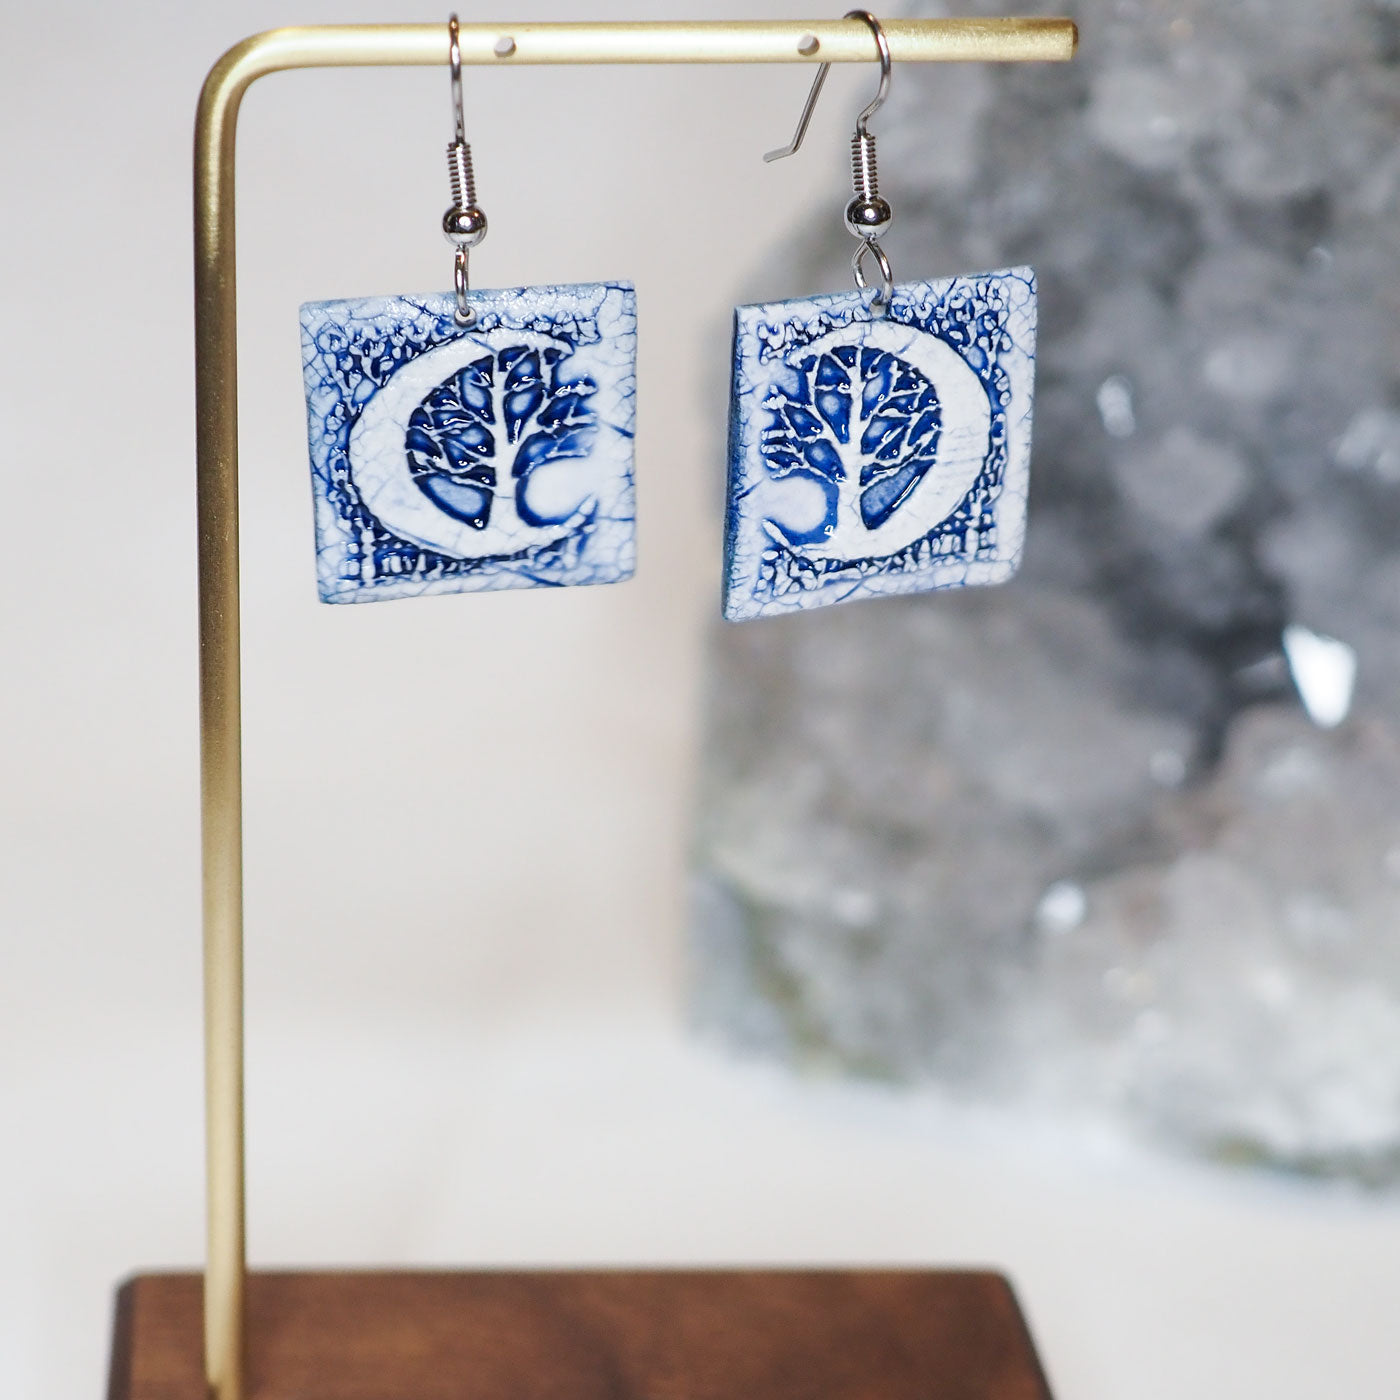 Hand-made, blue and white, square dangle earrings with a large crescent moon and forest scene